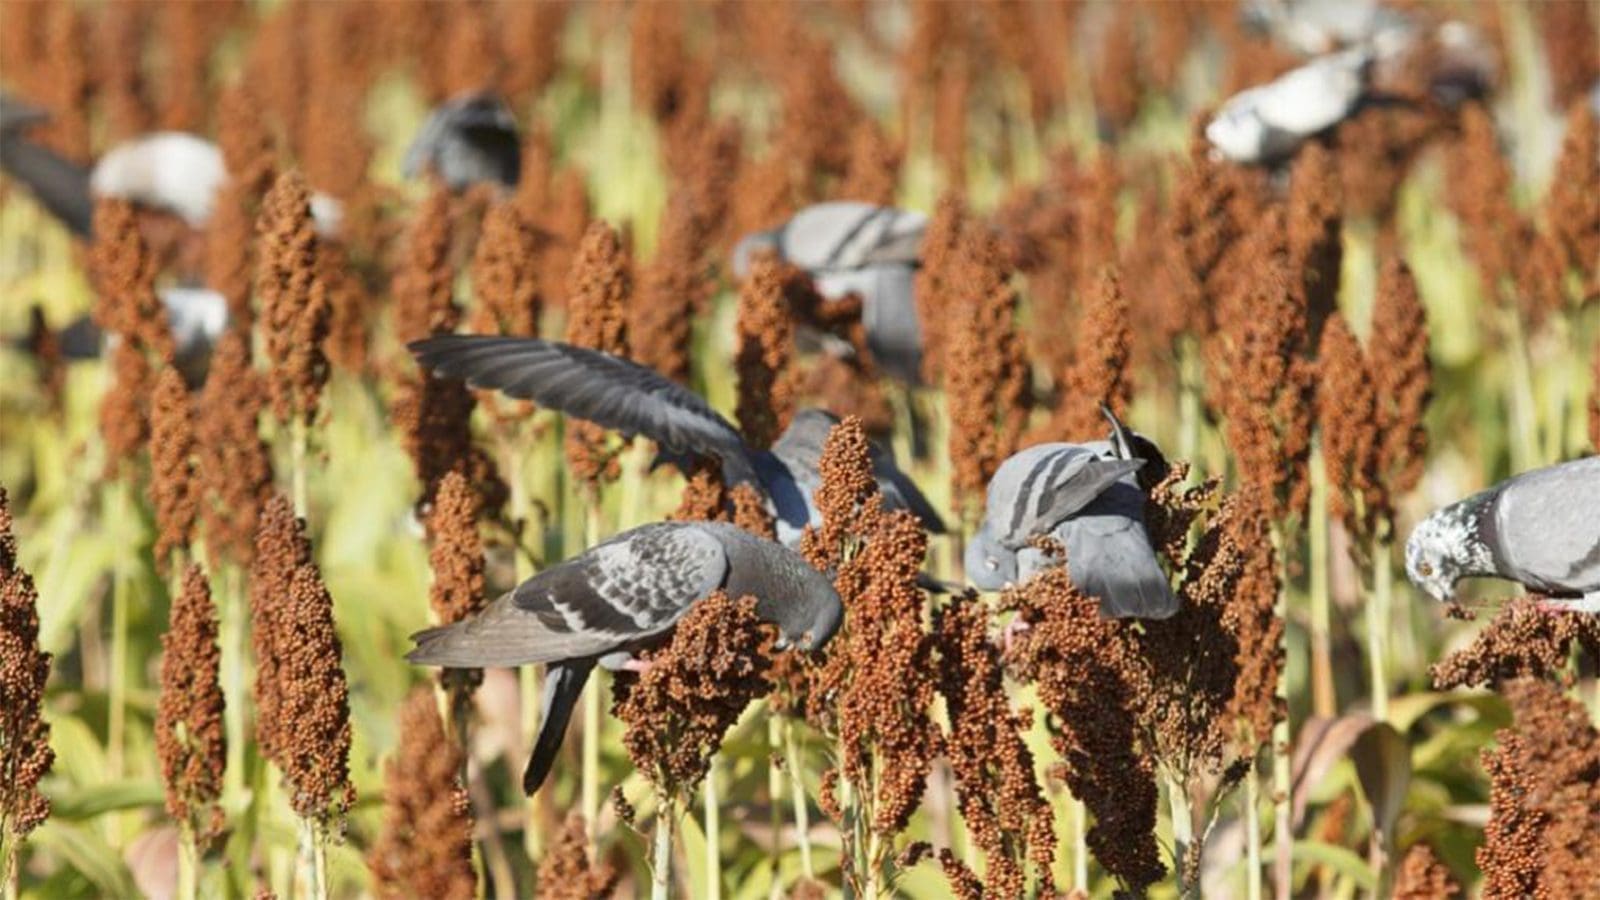 Researchers assess food safety risks associated with wild birds in agriculture